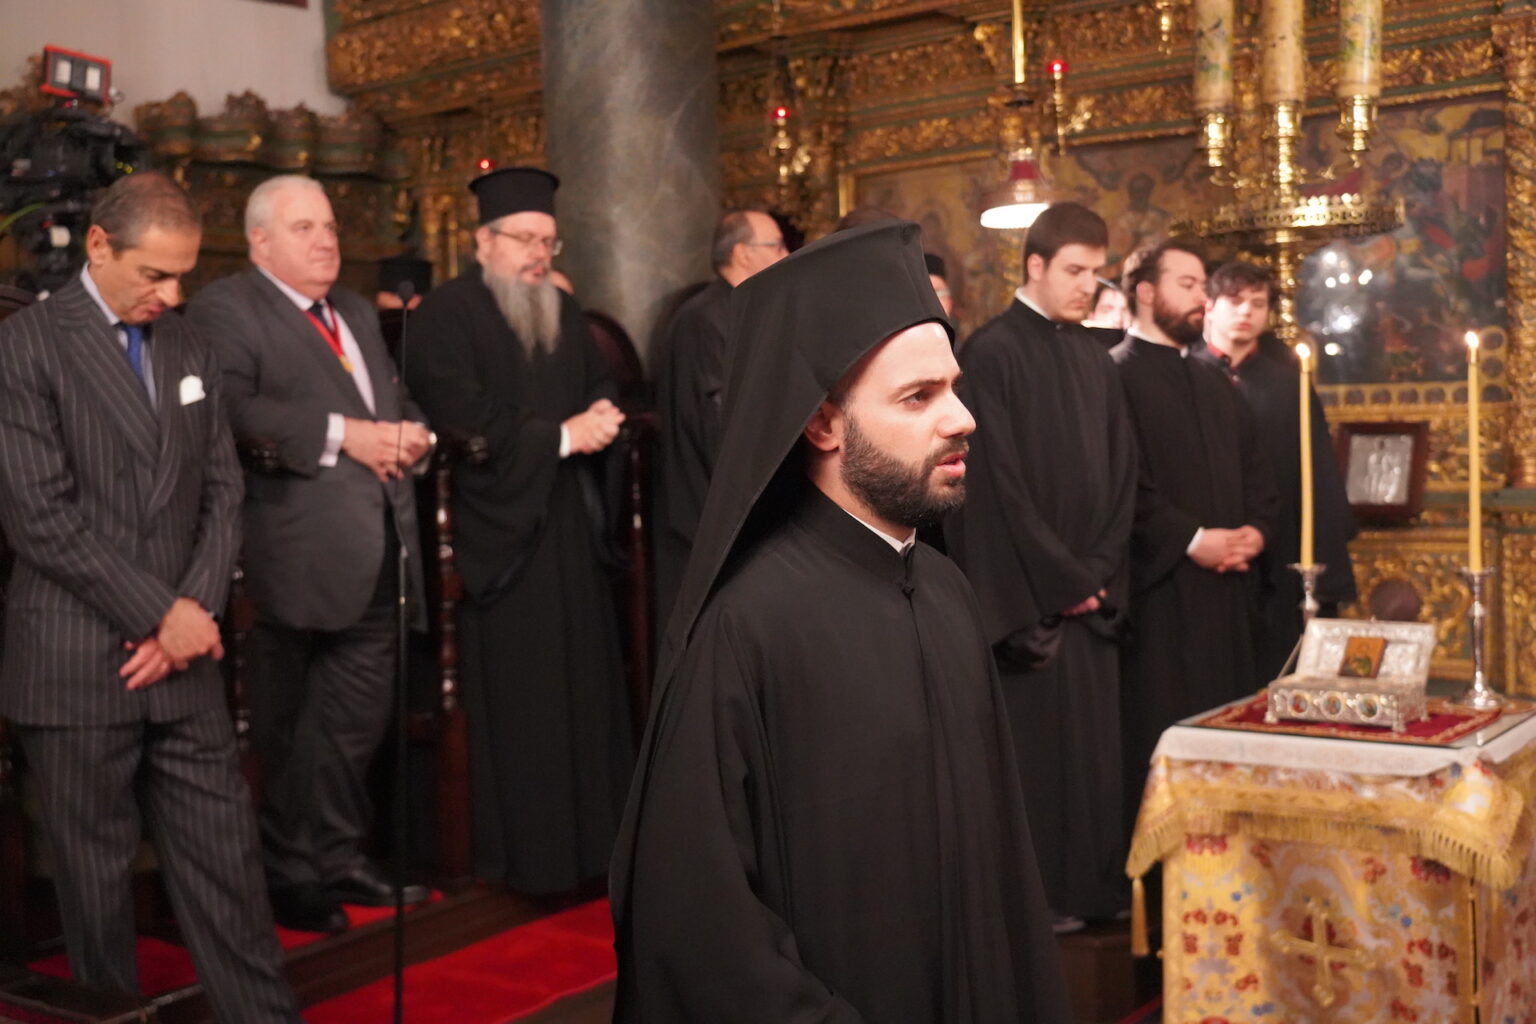 Dr. Leonidas Tzonis conferred as new Archon Ostiarios of the Ecumenical Patriarchate